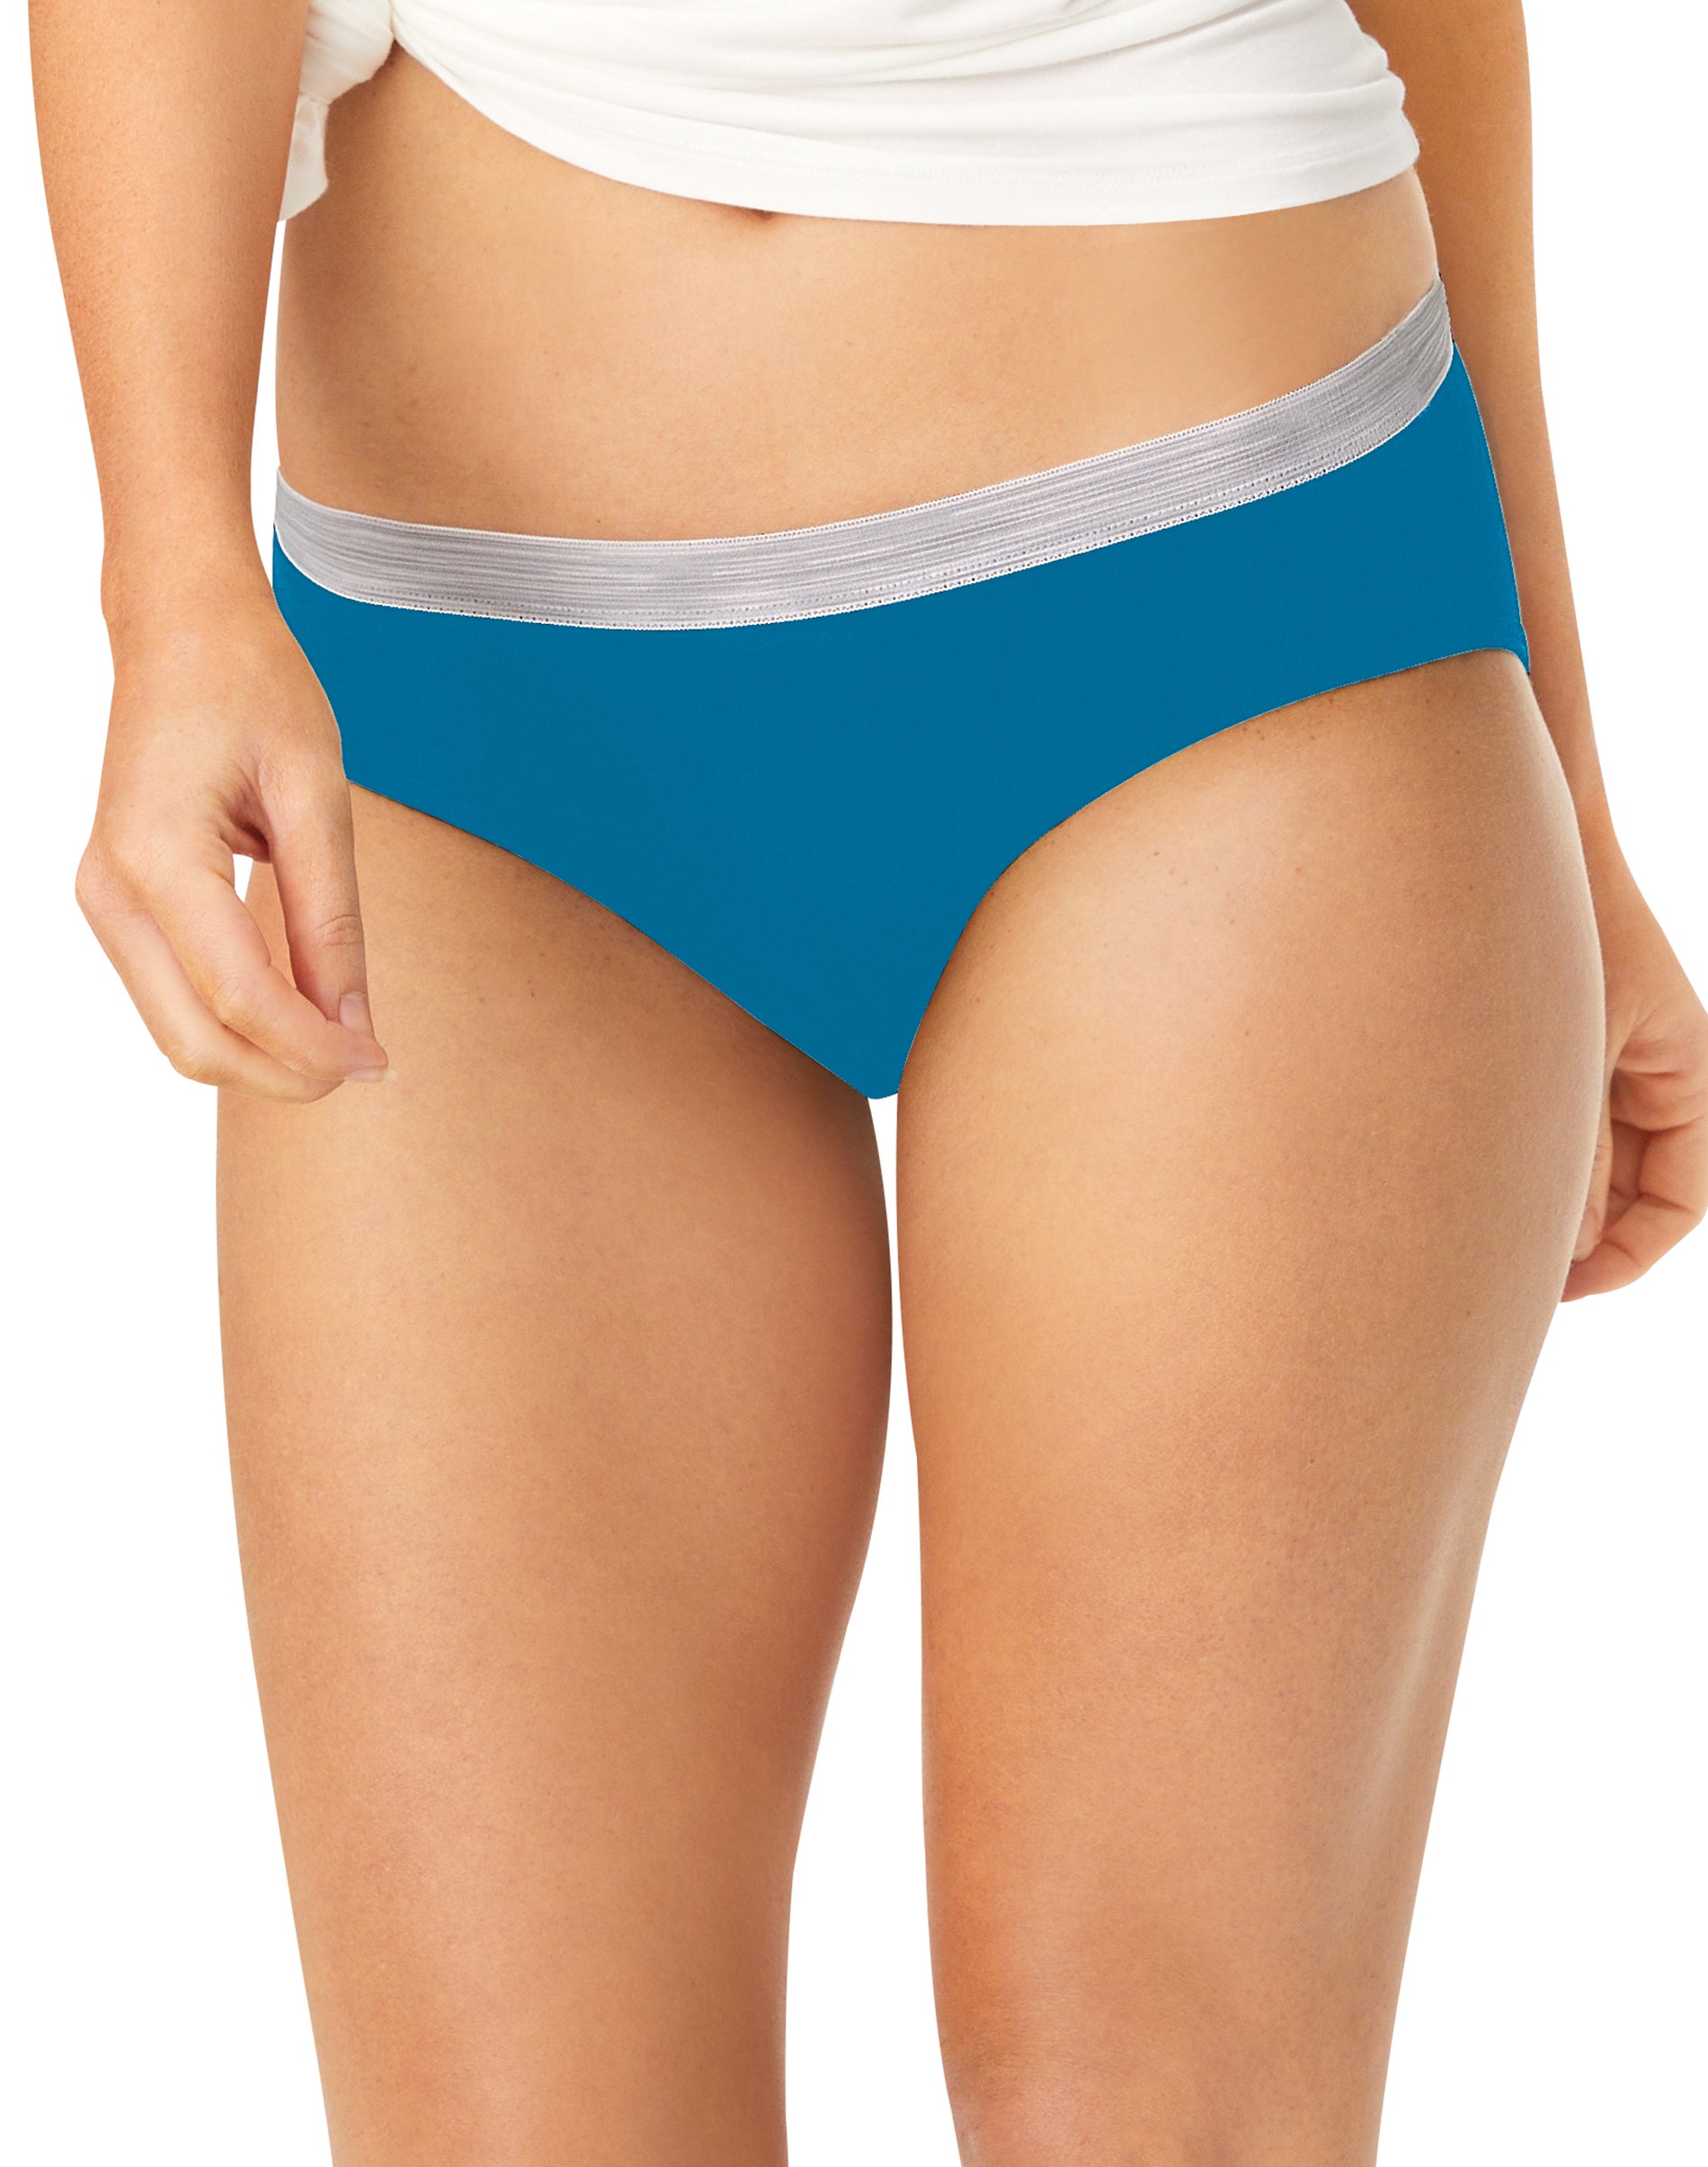 Hanes Women's Cotton Hipster Underwear, Moisture Wicking, 6-Pack Assorted 5 - image 1 of 5